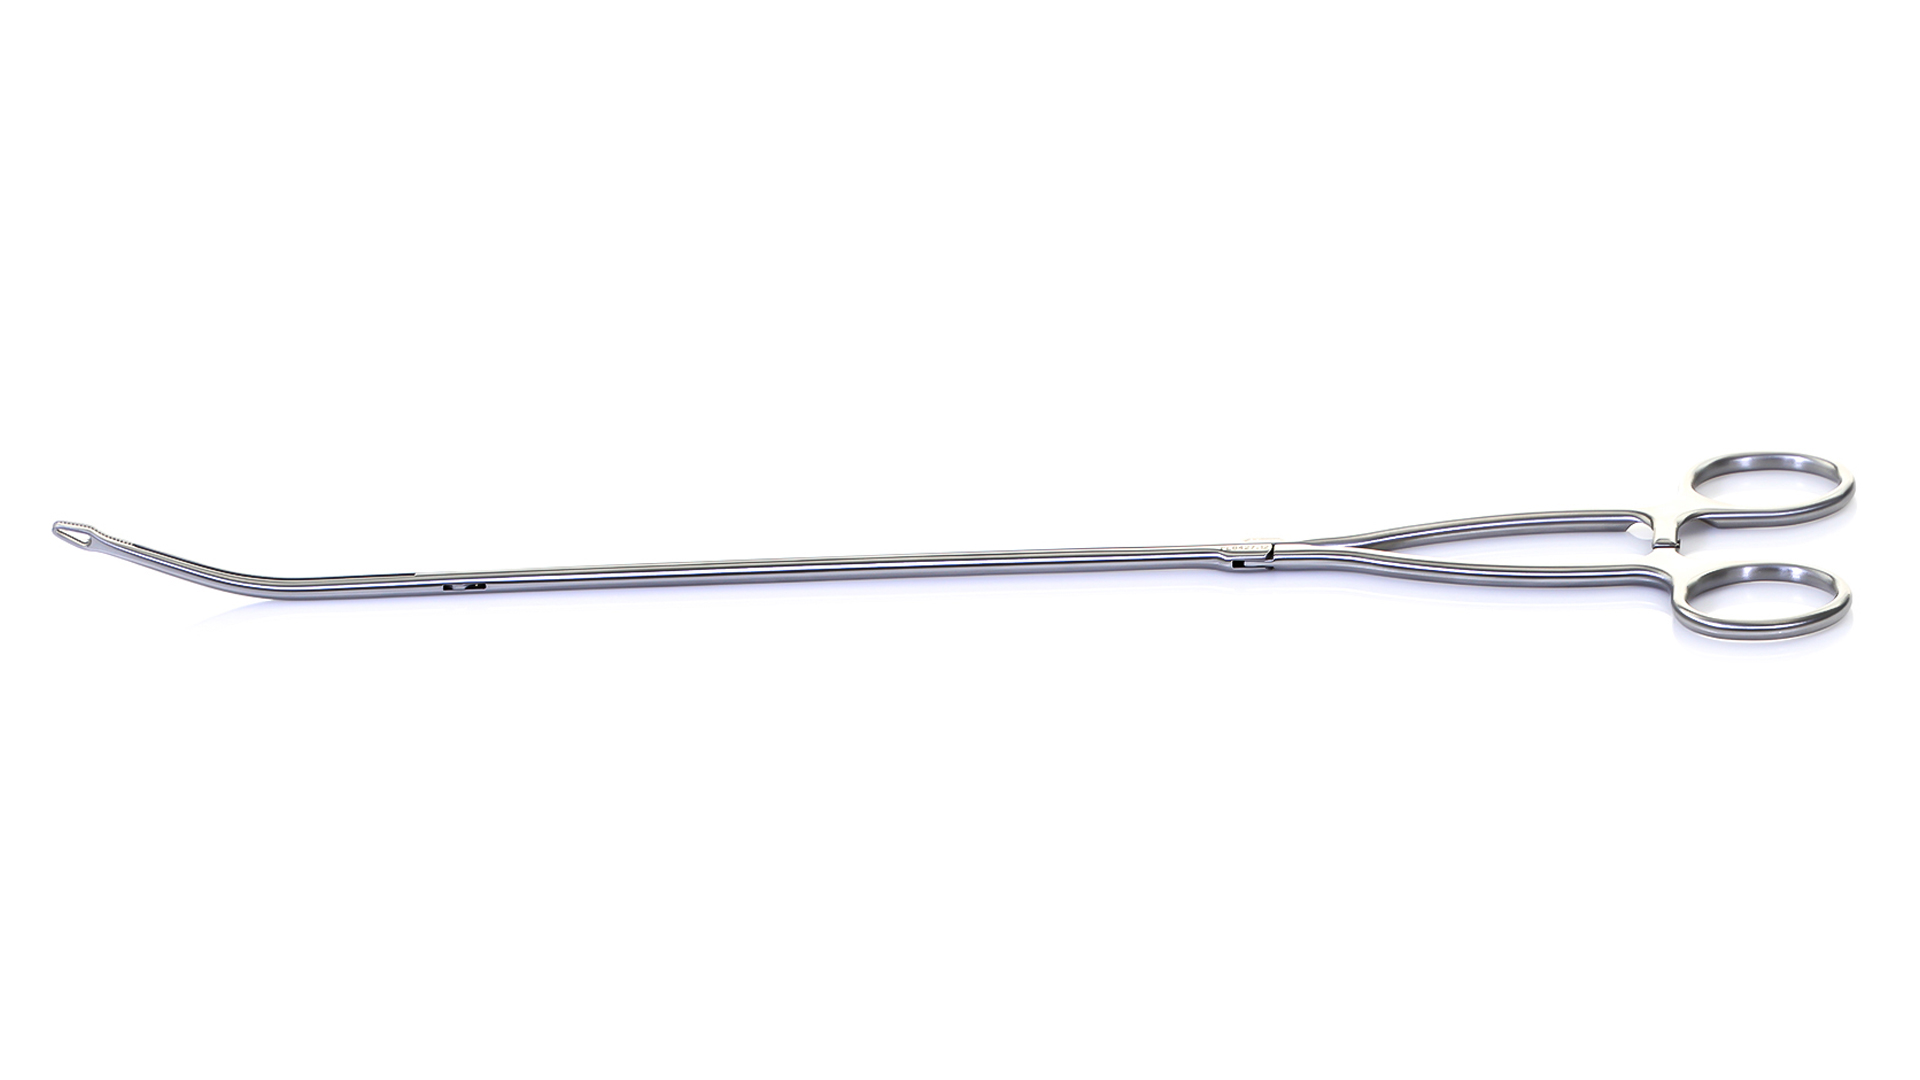 VATS Viper Forceps - Curved Left Tapered 5mm to 3mm Viper-head Shaped Atraumatic Serrated Jaws